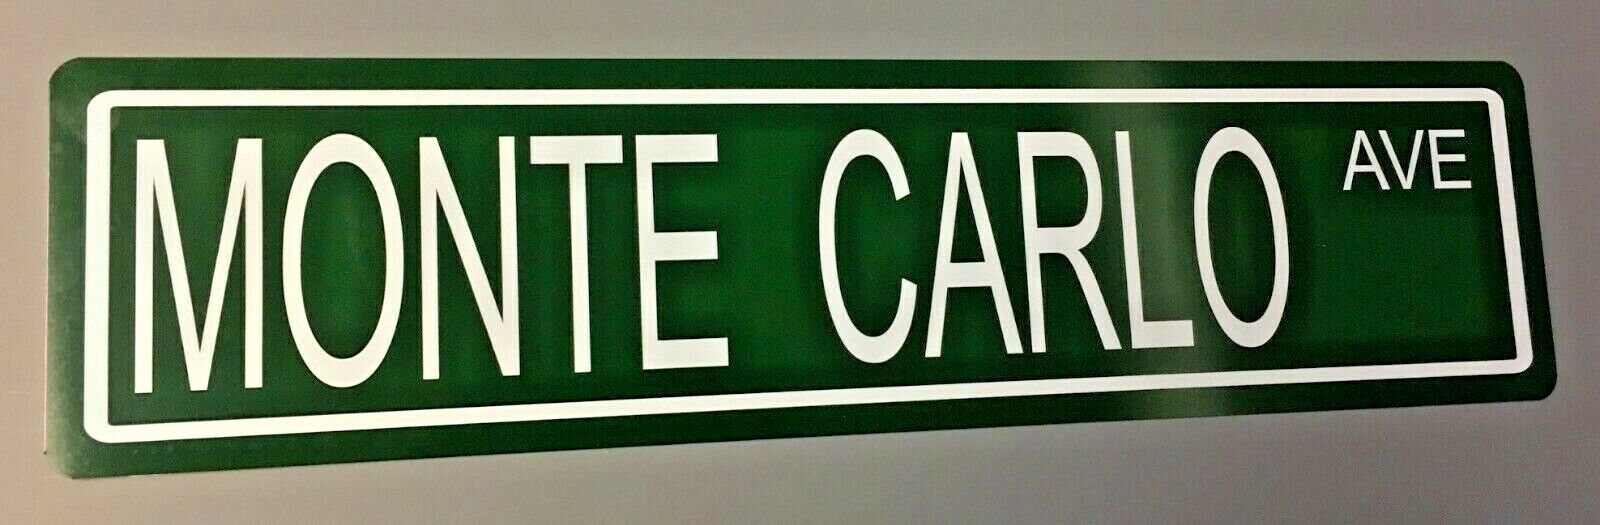 MONTE CARLO AVE METAL STREET SIGN FITS CHEVY CHEVROLET SS 402 454 MANCAVE SHOP